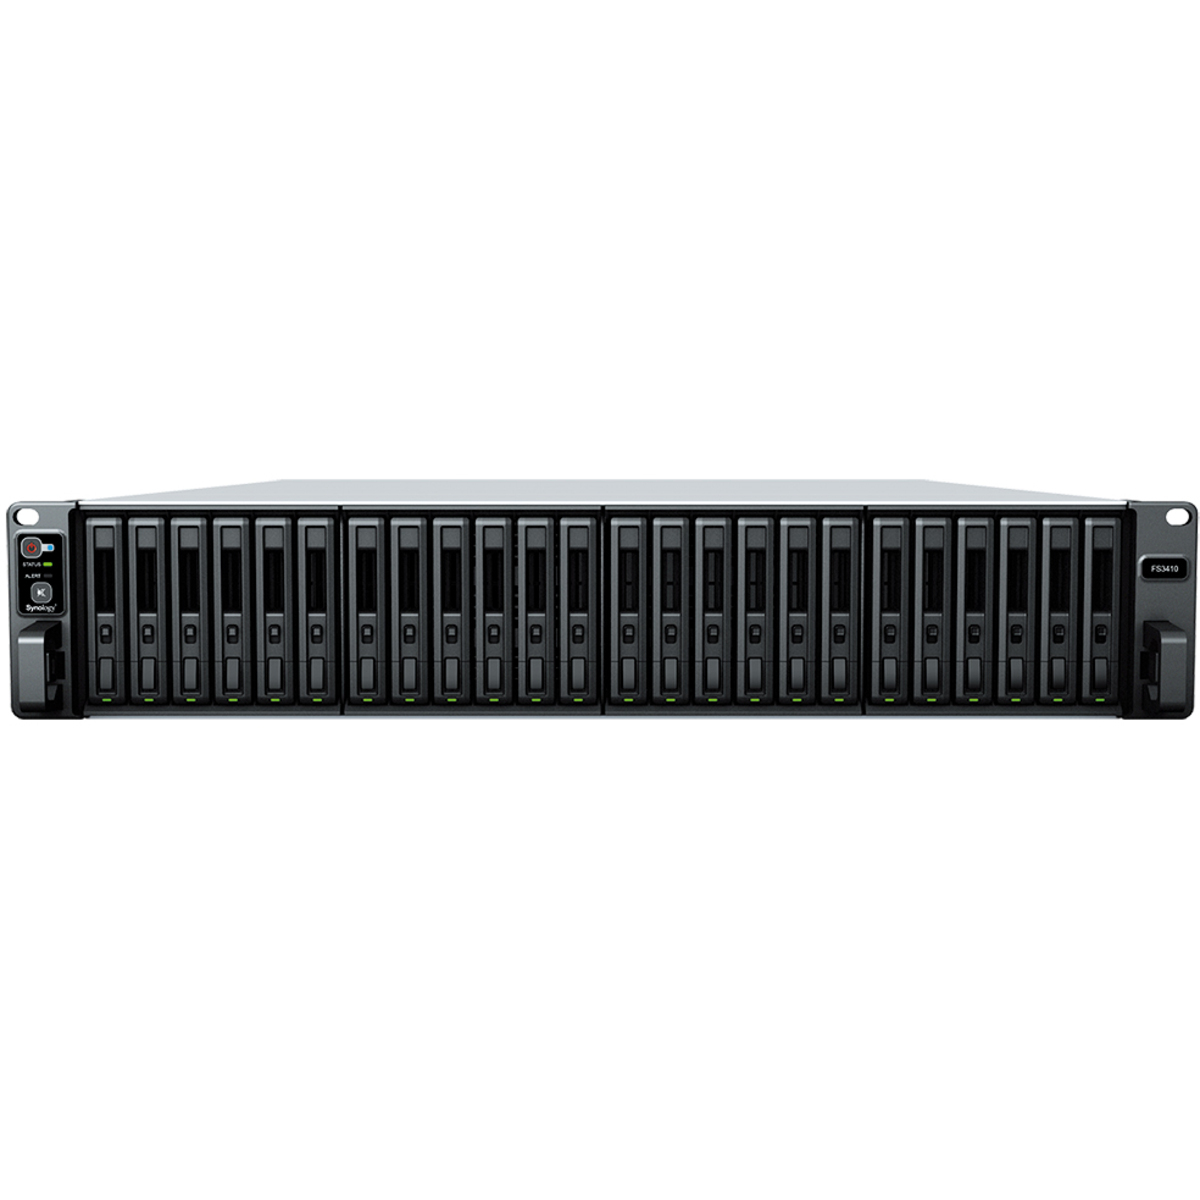 Synology FlashStation FS3410 20tb 24-Bay RackMount Large Business / Enterprise NAS - Network Attached Storage Device 20x1tb Samsung 870 EVO MZ-77E1T0BAM 2.5 560/530MB/s SATA 6Gb/s SSD CONSUMER Class Drives Installed - Burn-In Tested FlashStation FS3410